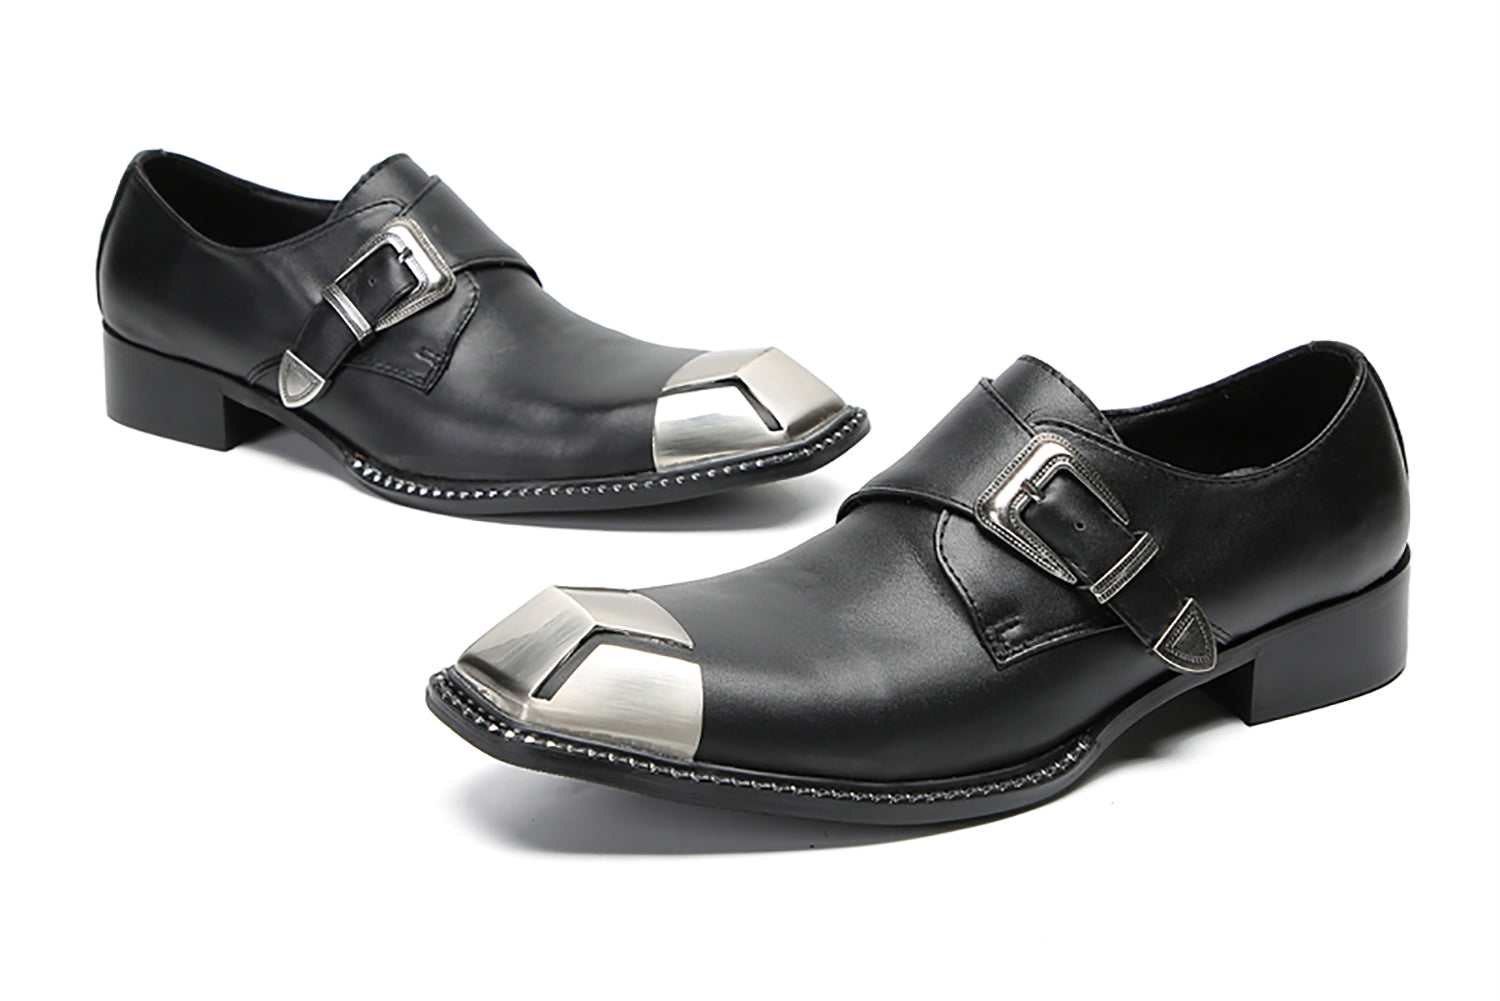 Men's Casual Metal-Square Toe Buckle Western Loafers